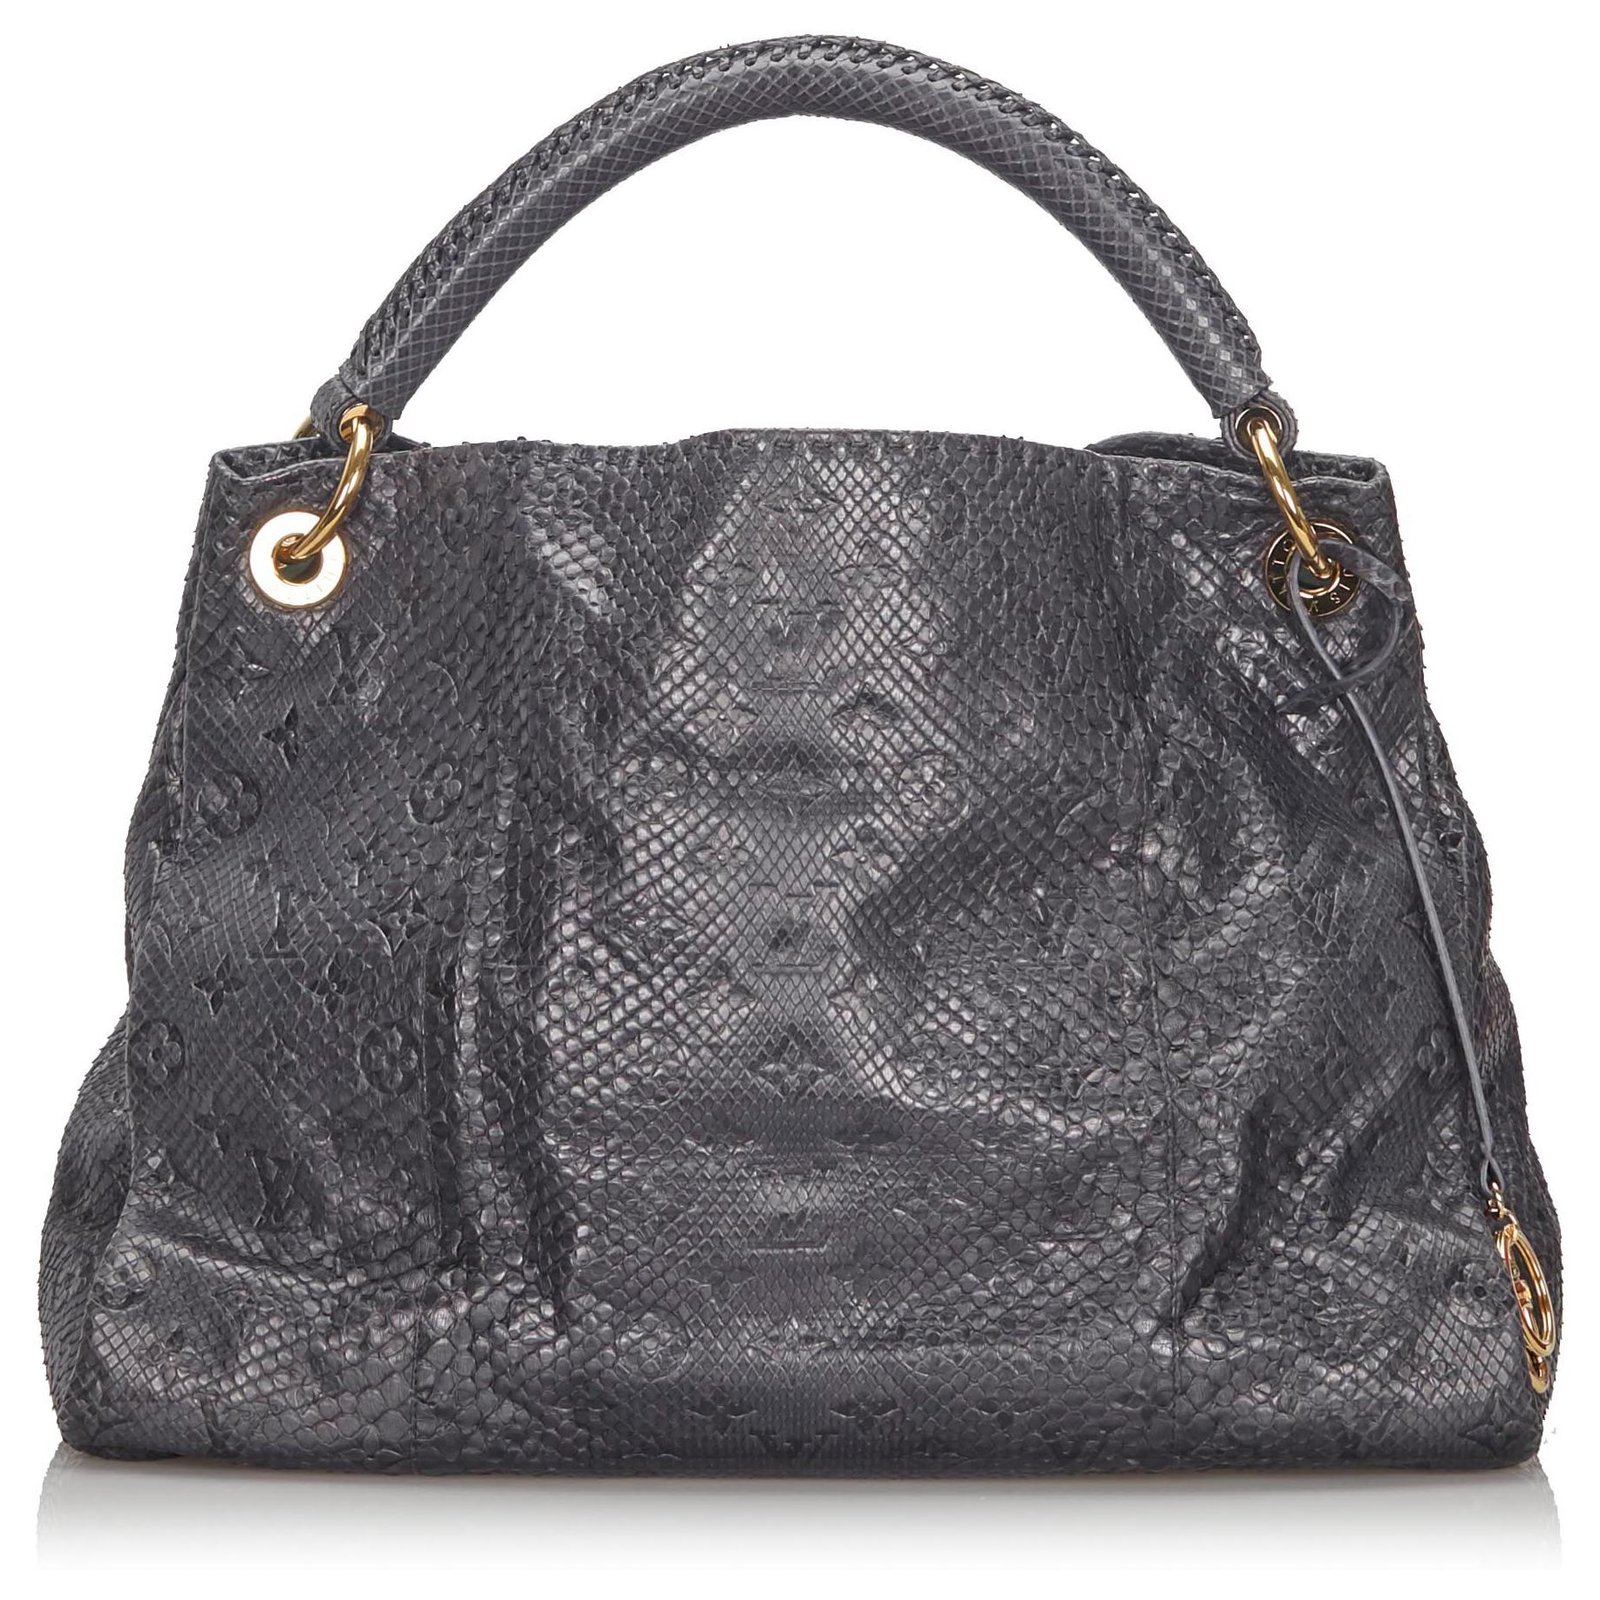 Louis Vuitton Limited Edition Navy Blue Python Artsy MM Bag